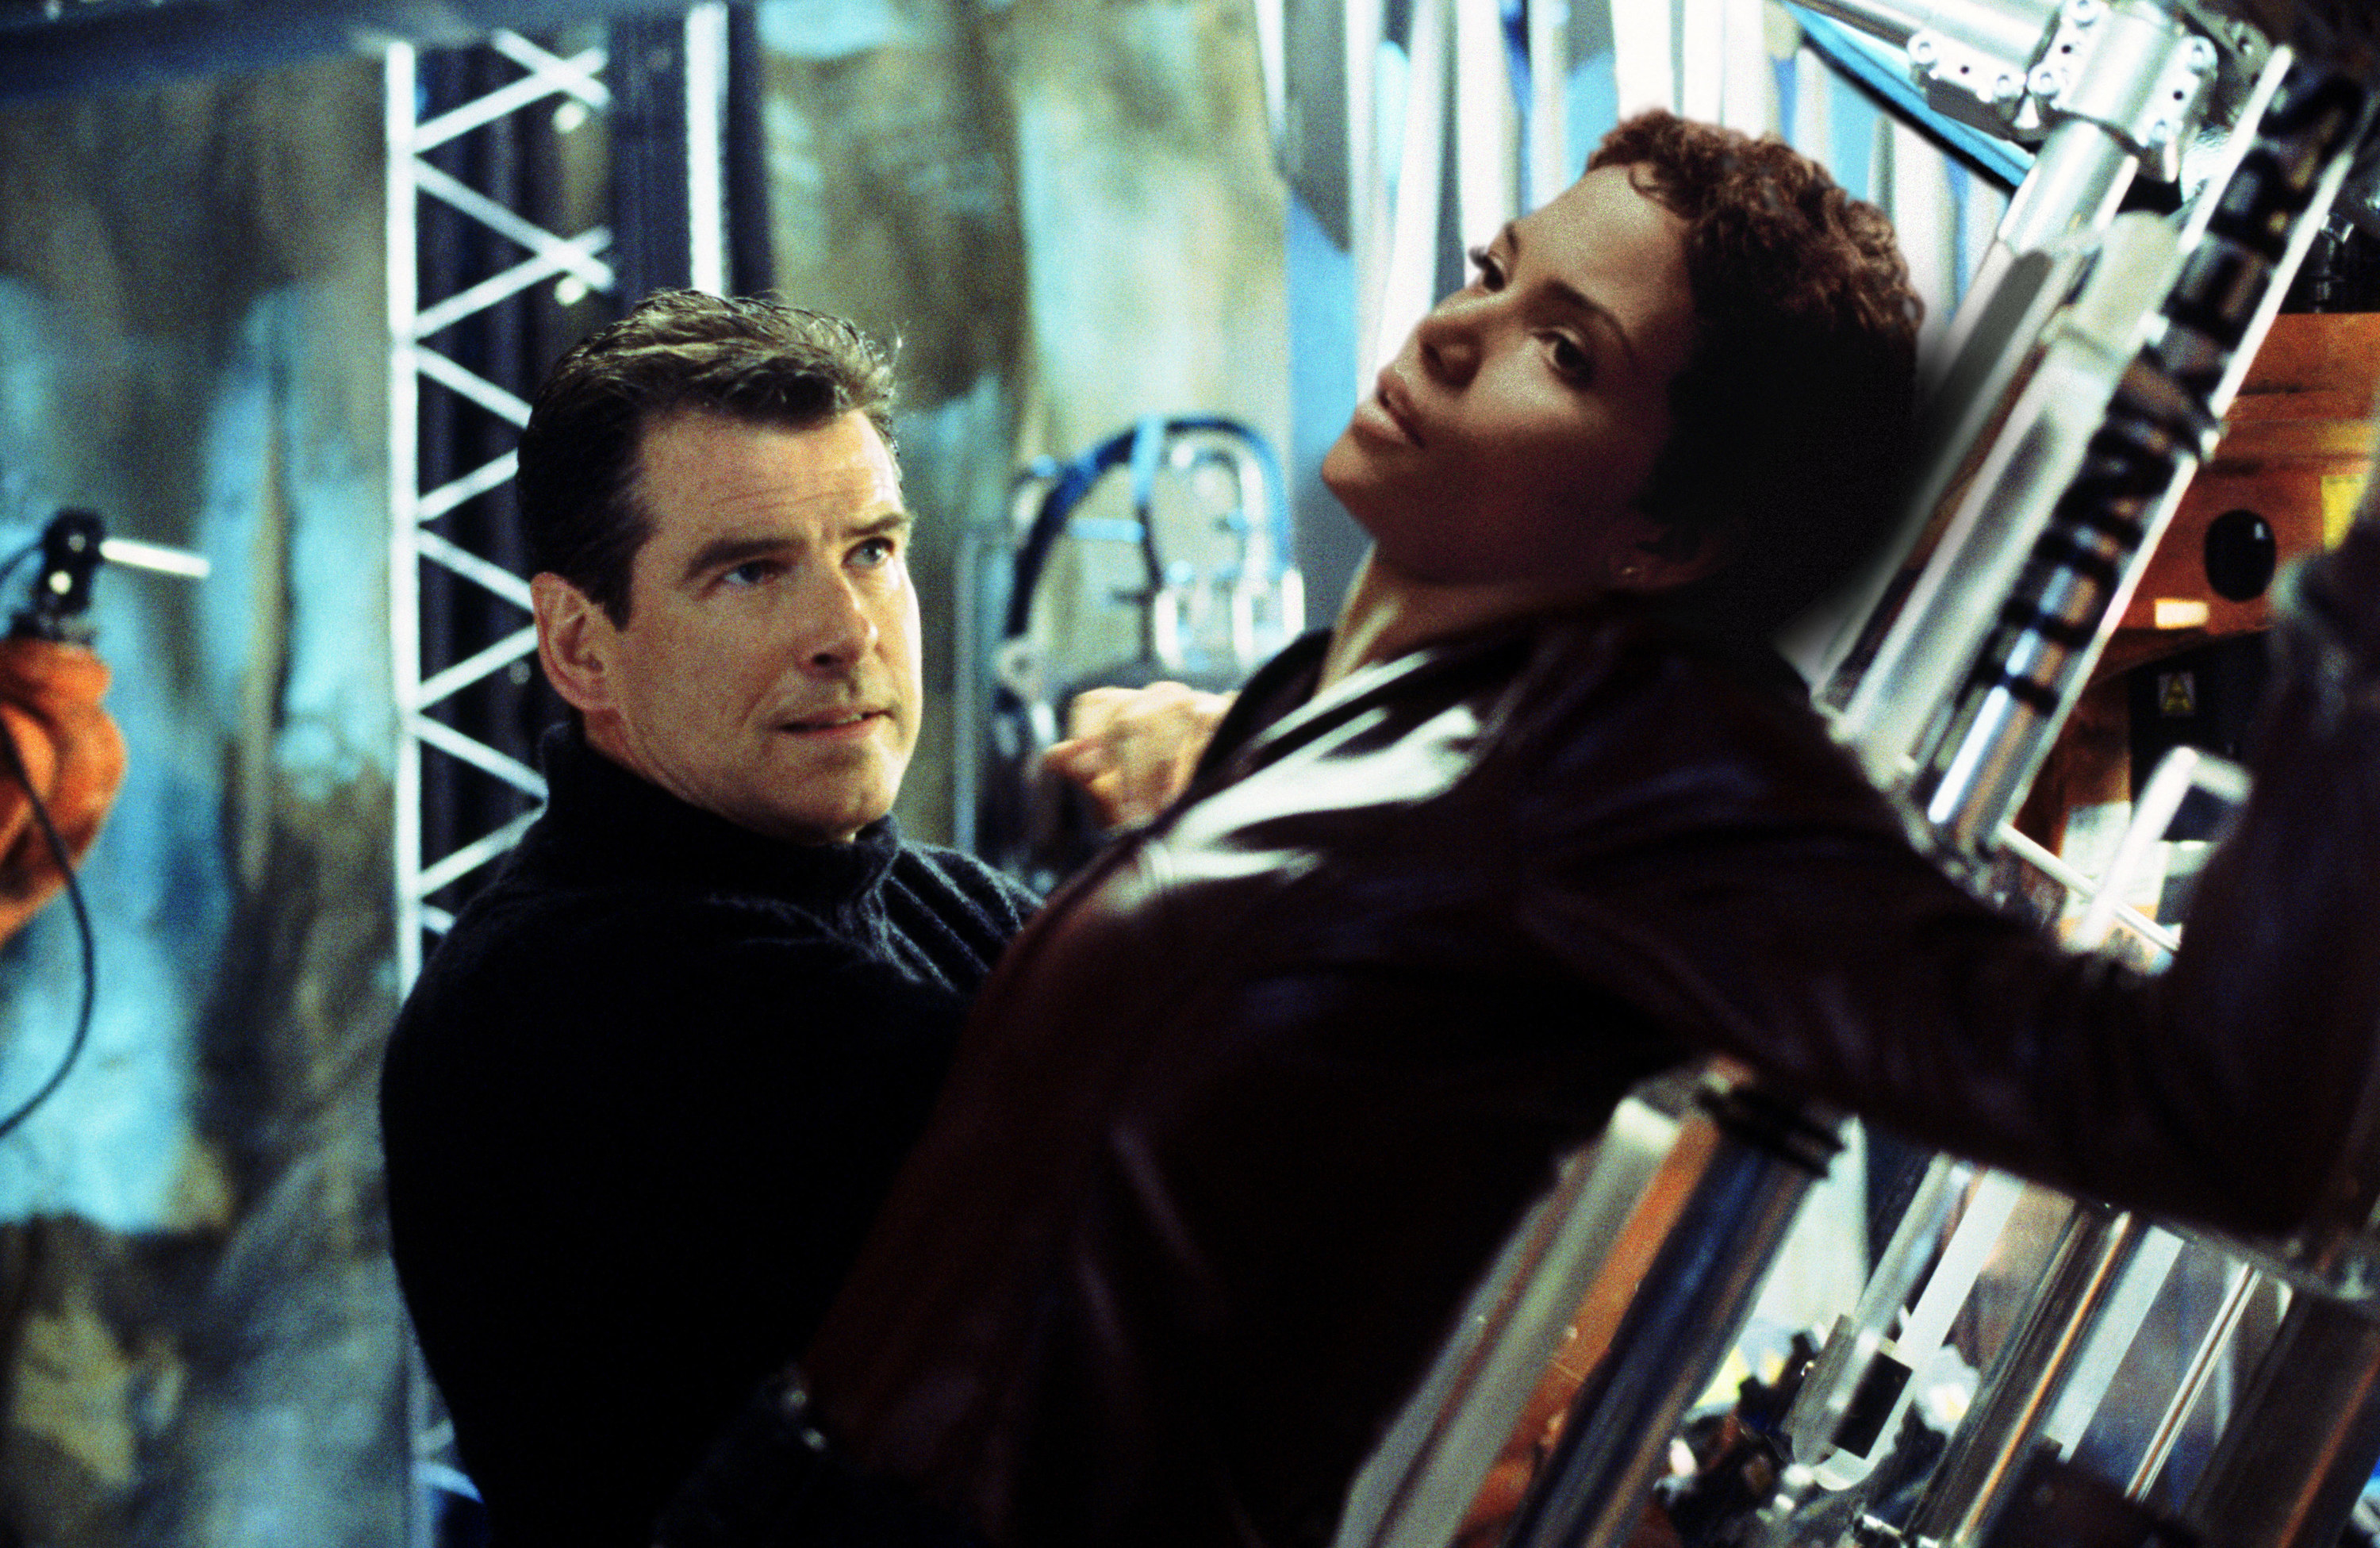 Pierce Brosnan looking up at Halle Berry in &quot;Die Another Day&quot;